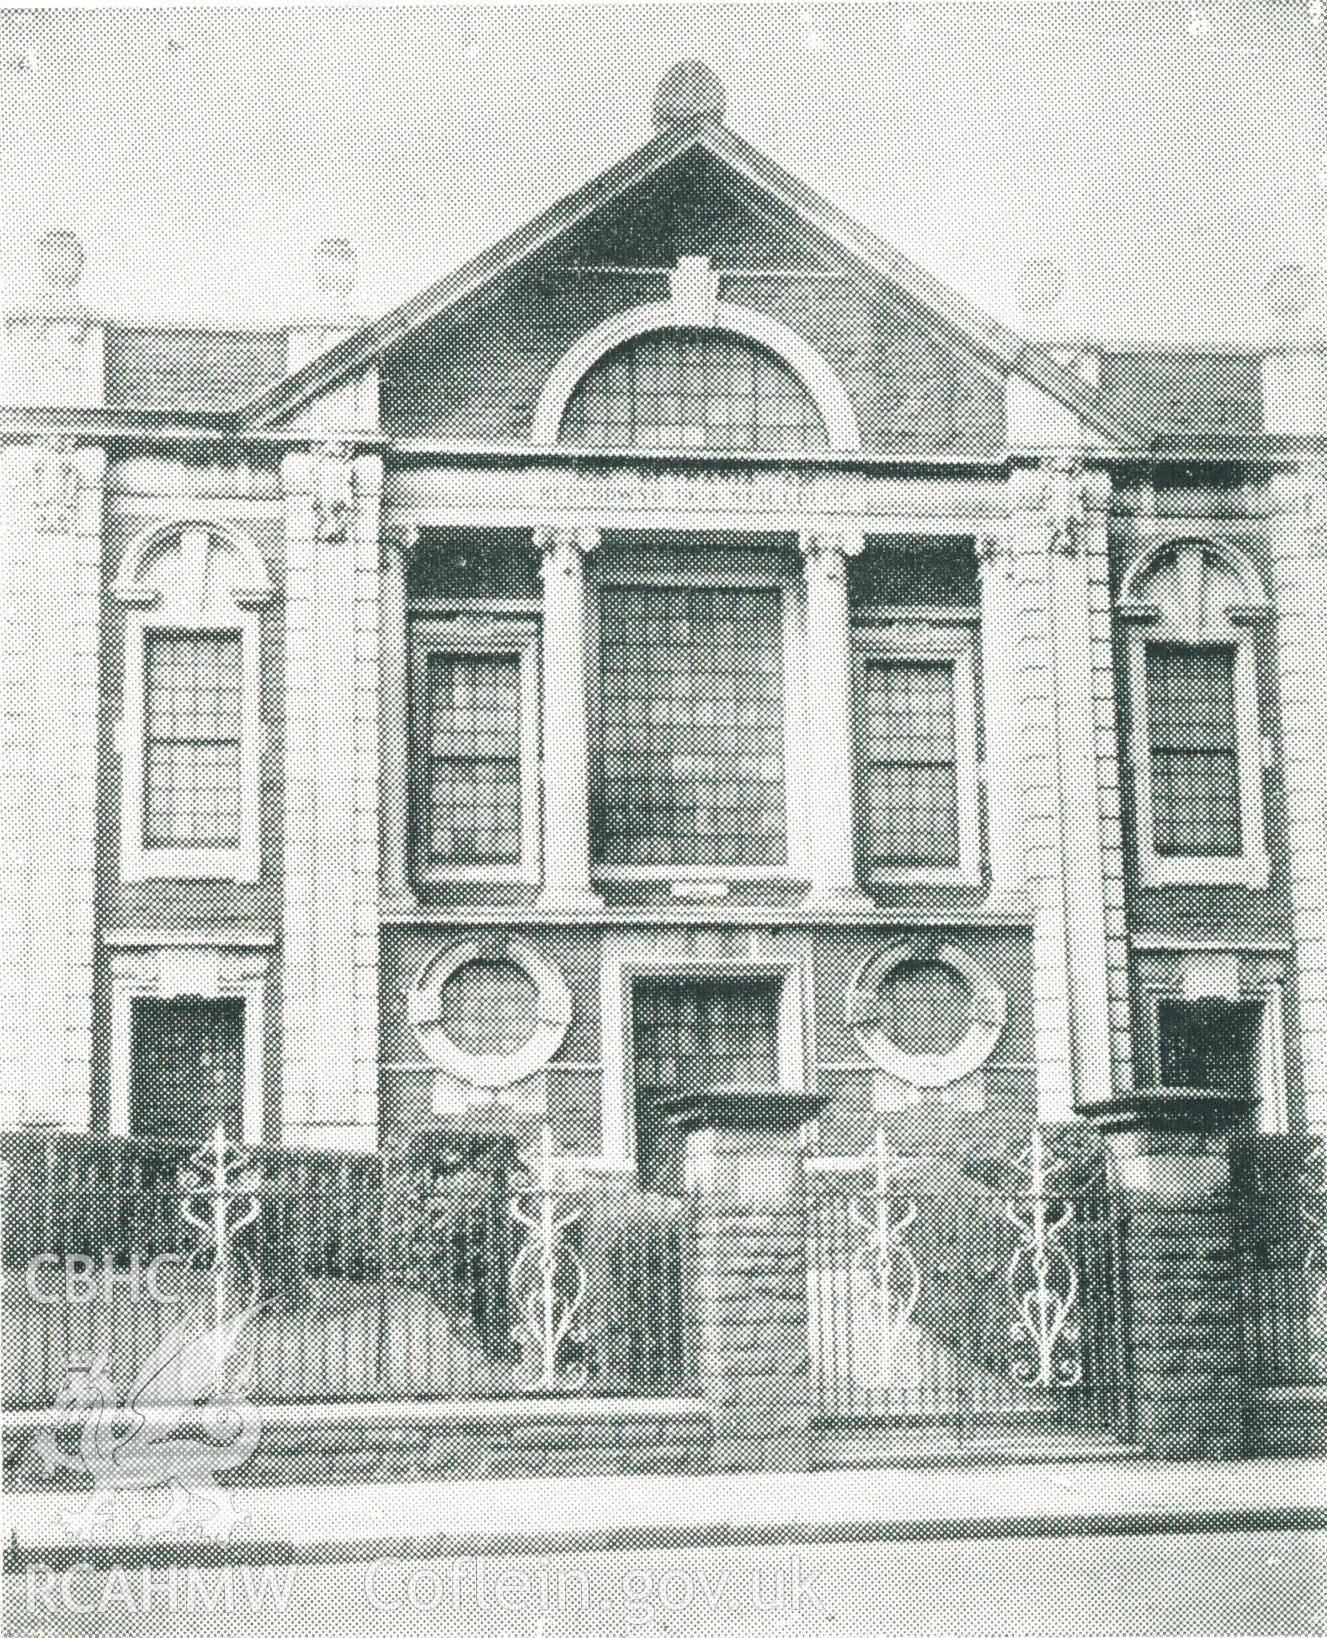 Black and white photograph of the front facade of the chapel, from a copy of the programme for the second opening of Bethania Chapel on 12th April 1967. Donated to the RCAHMW by Enyd Carroll as part of the Digital Dissent Project.